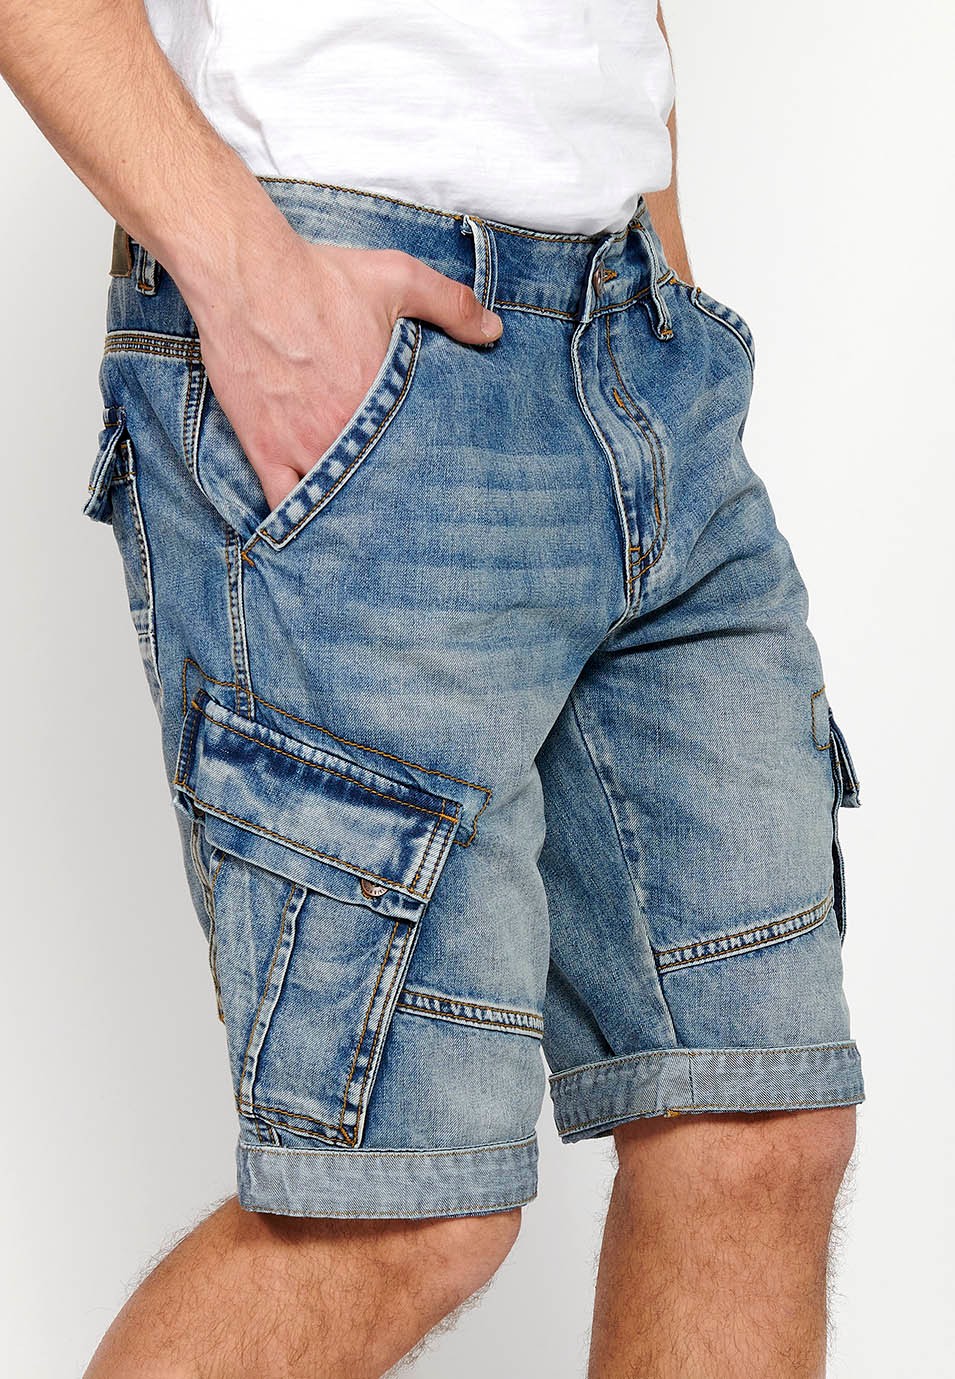 Denim Bermuda cargo shorts with front zipper and button closure with five pockets, one blue pocket pocket for Men 9